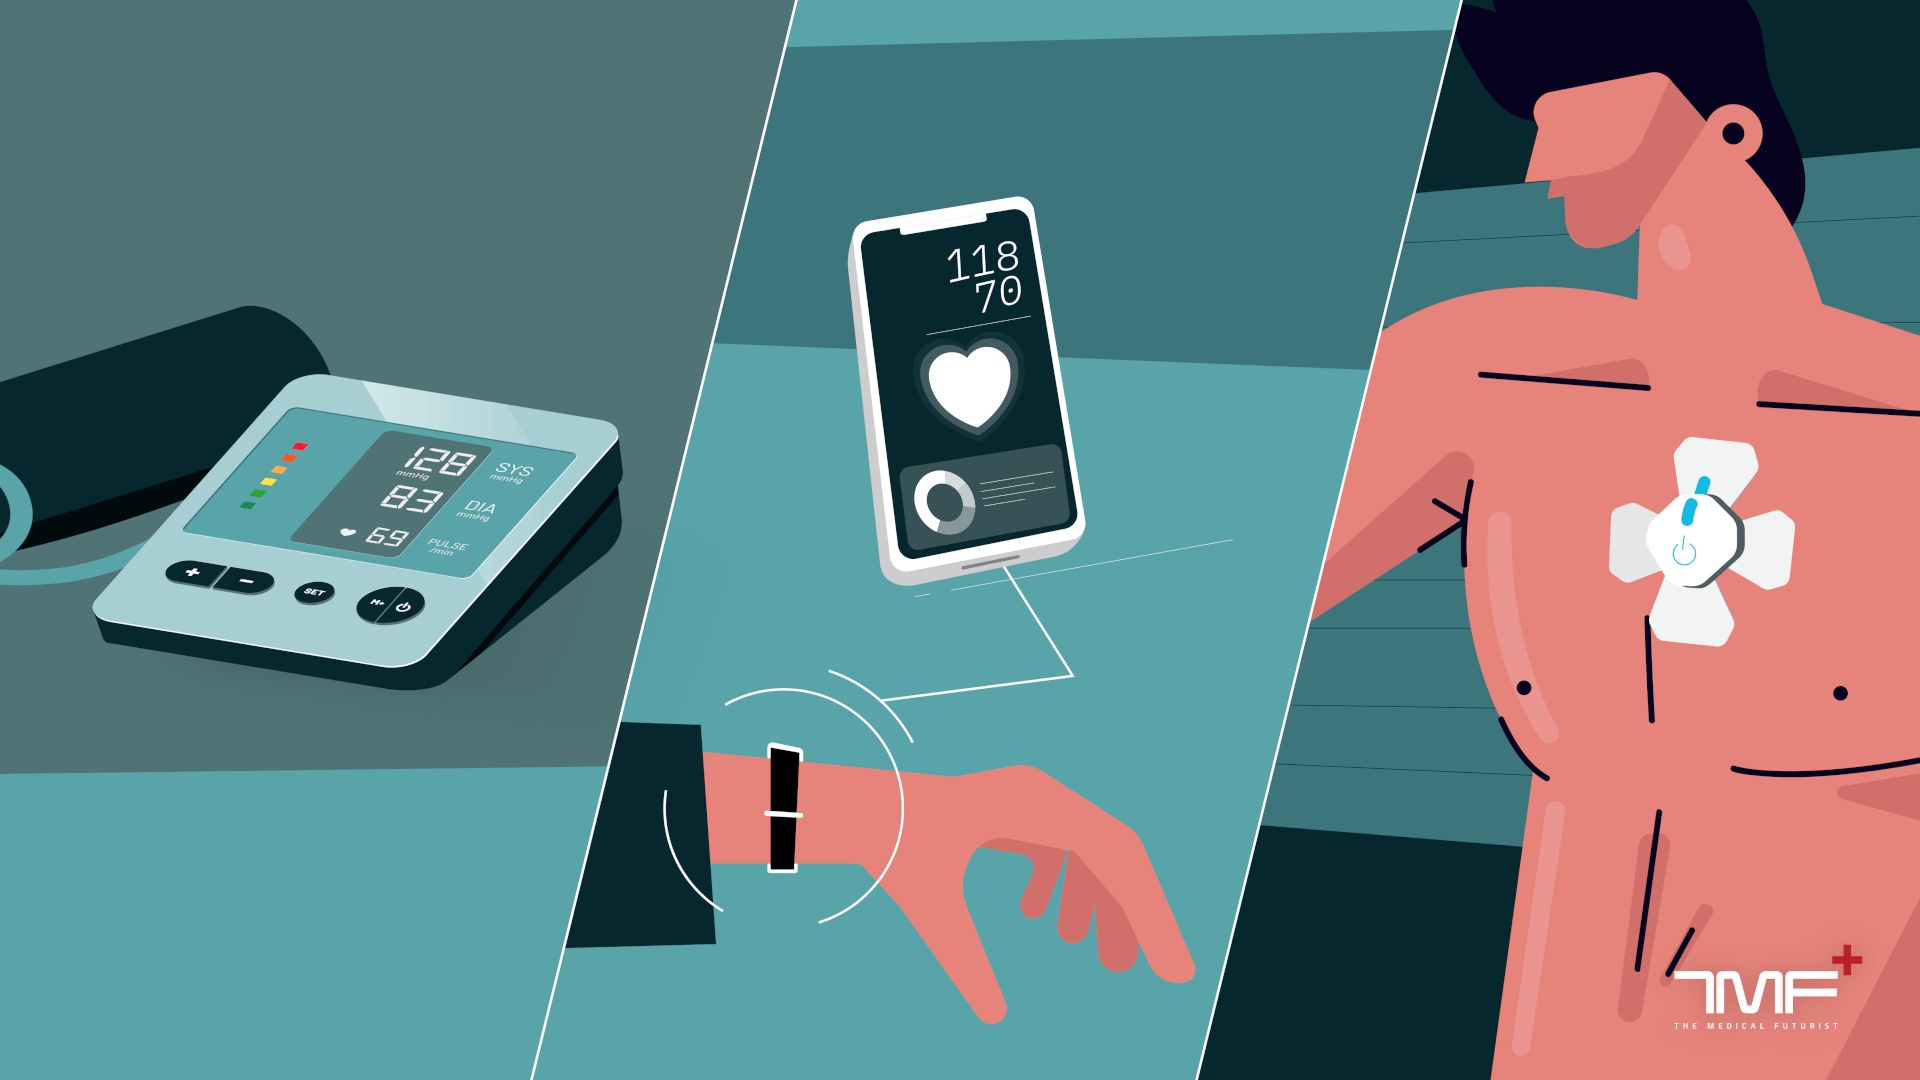 From Cuff To Cuffless: The Evolution Of Blood Pressure Monitoring